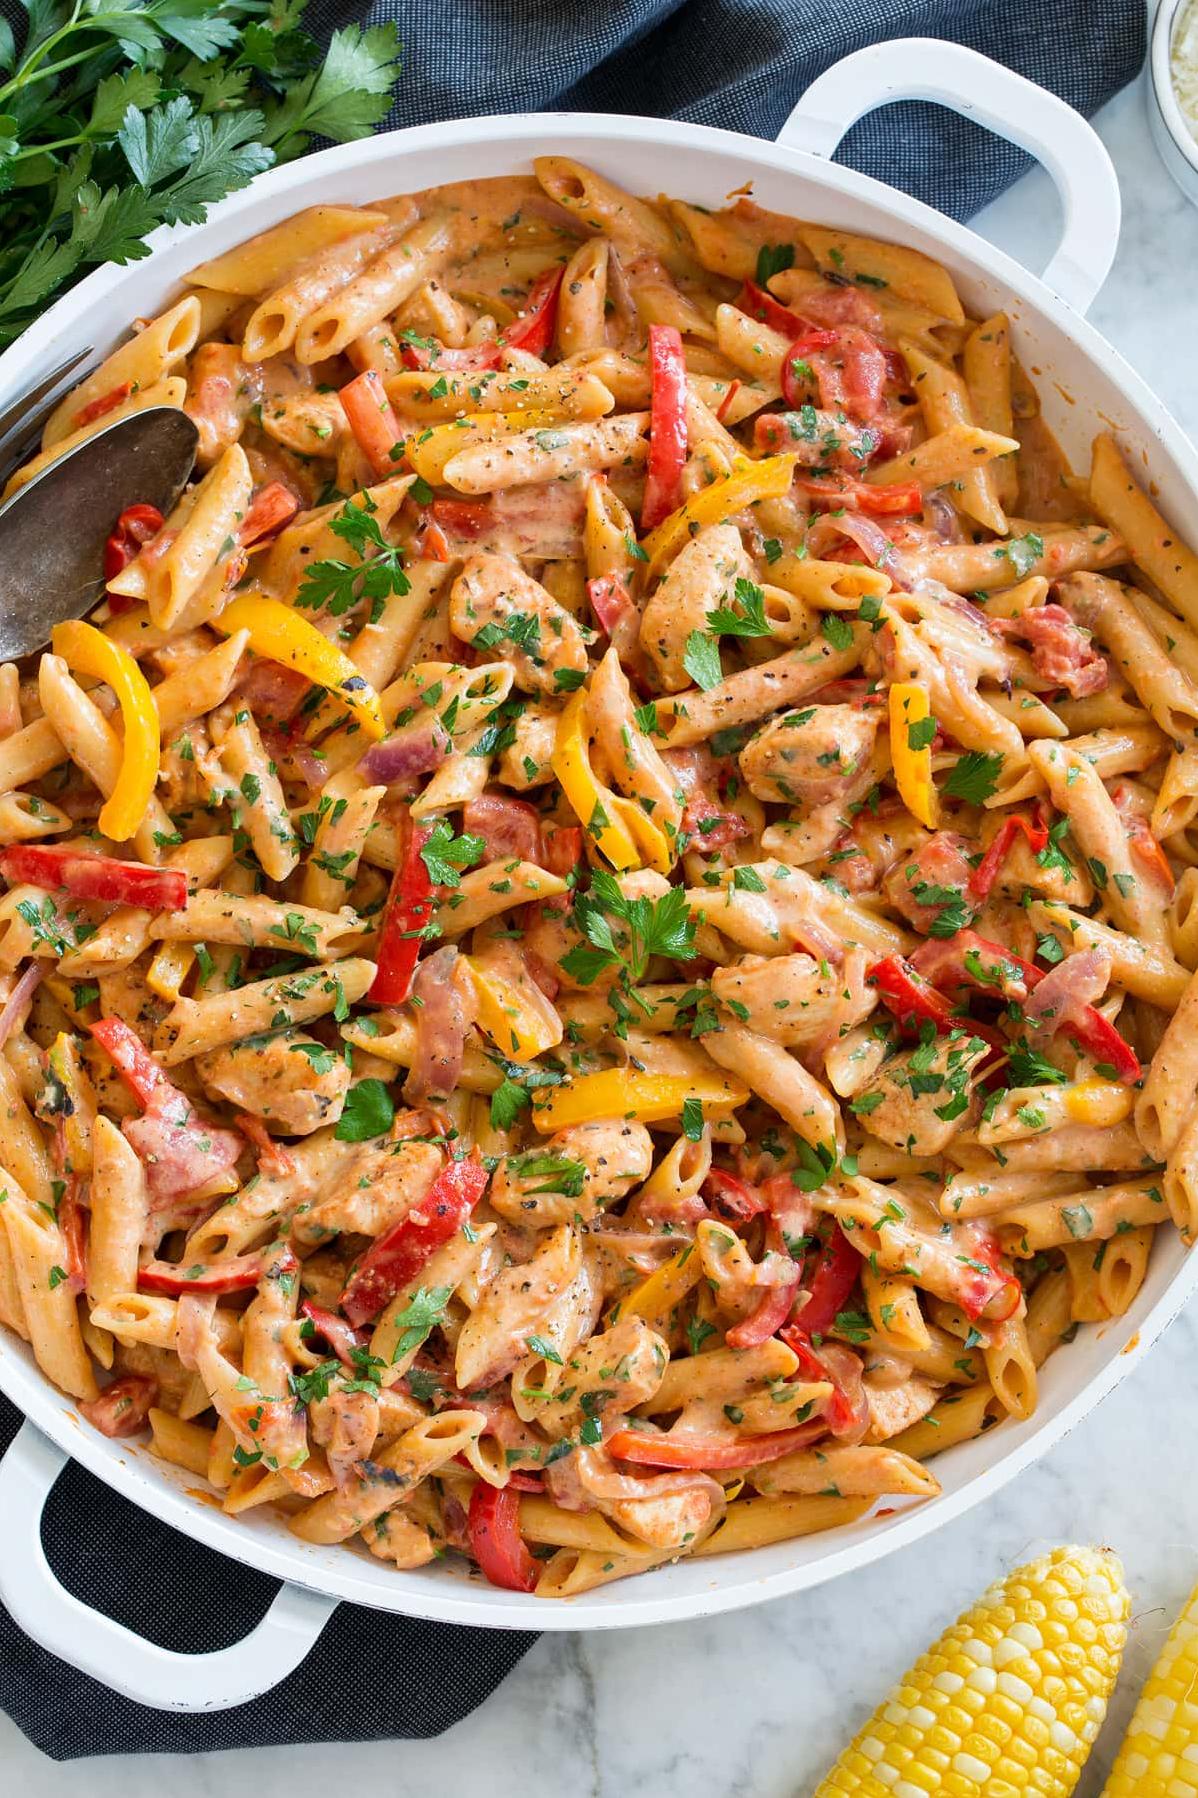  Get ready to take your taste buds on a trip down South with this chicken dish.